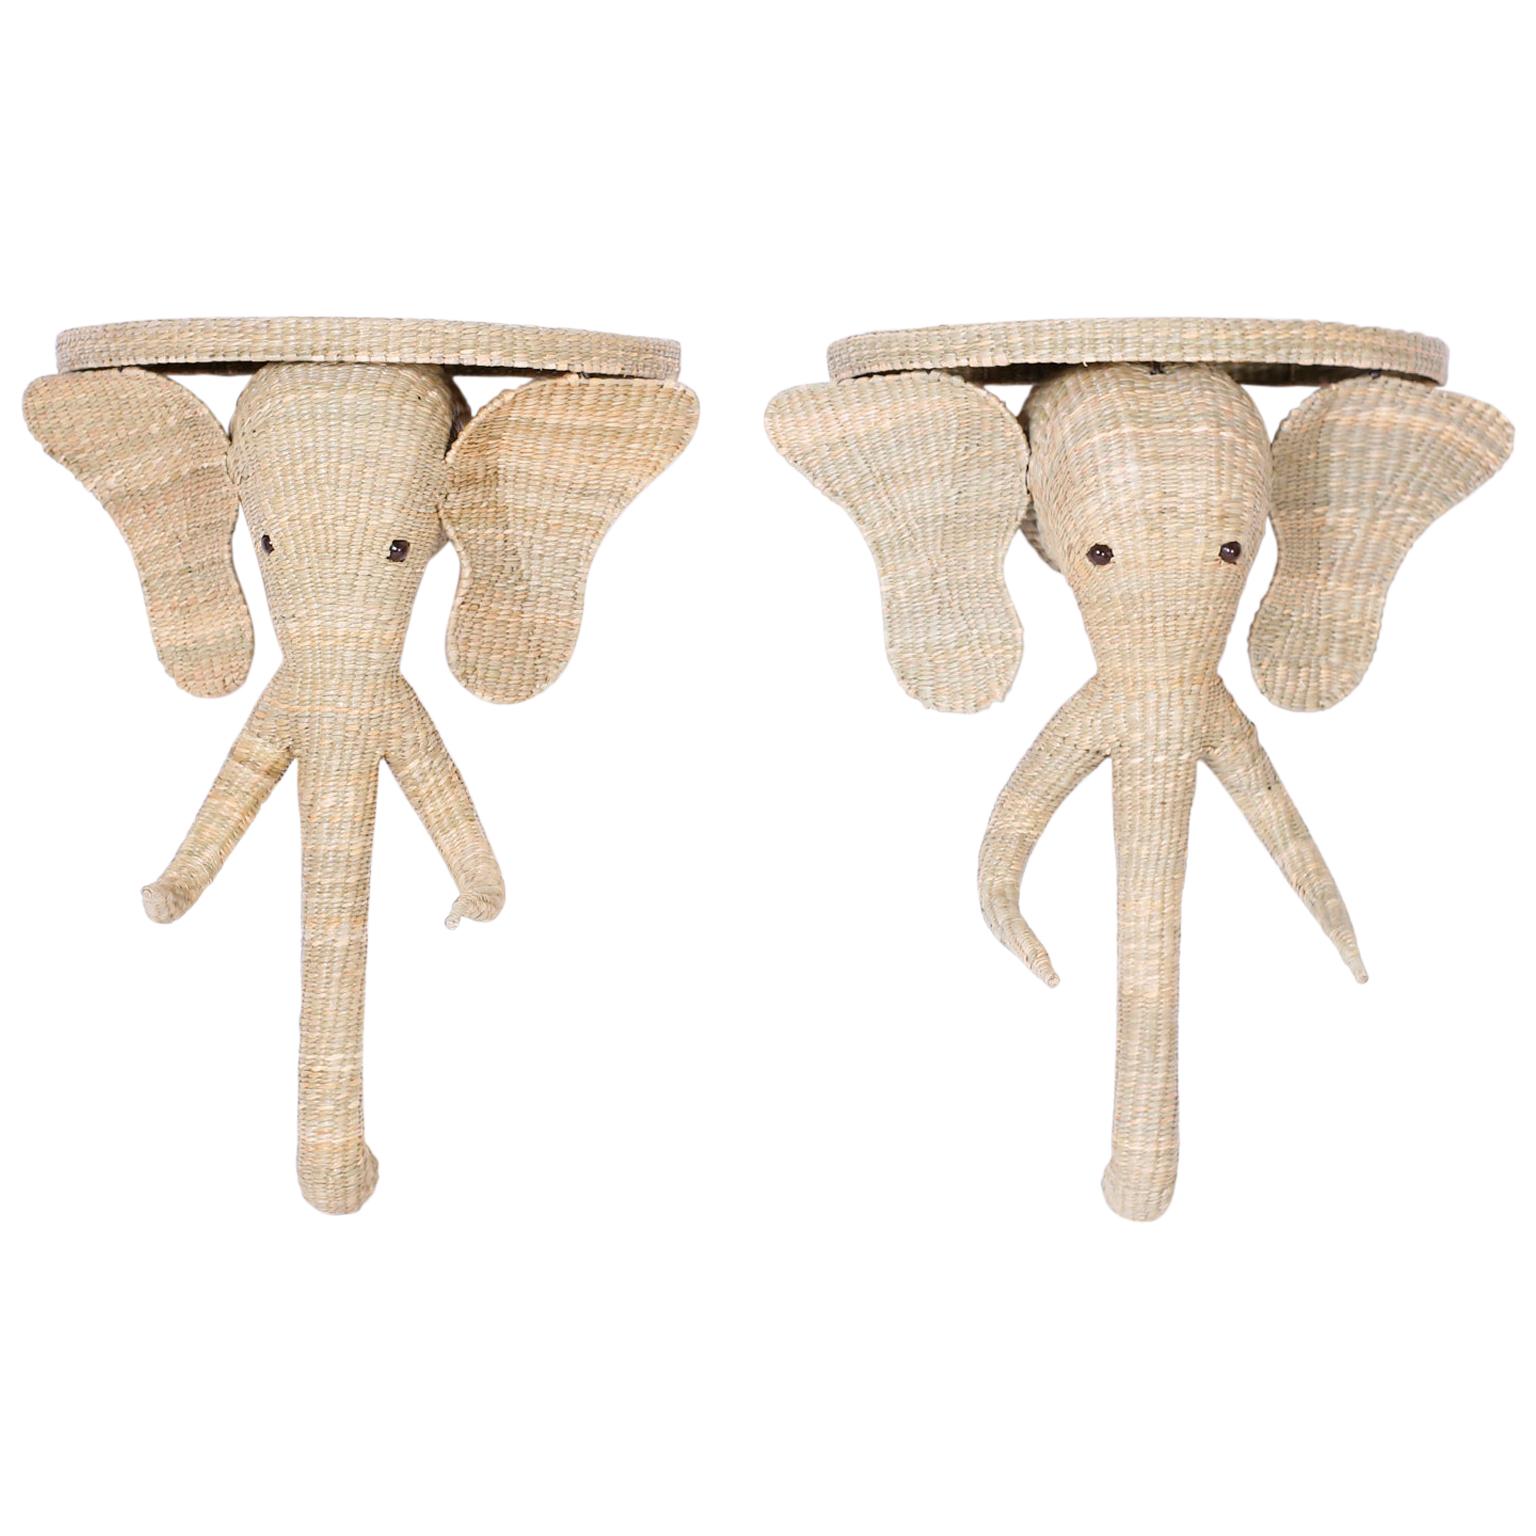 Pair of Wicker Elephant Consoles or Brackets from the FS Flores Collection